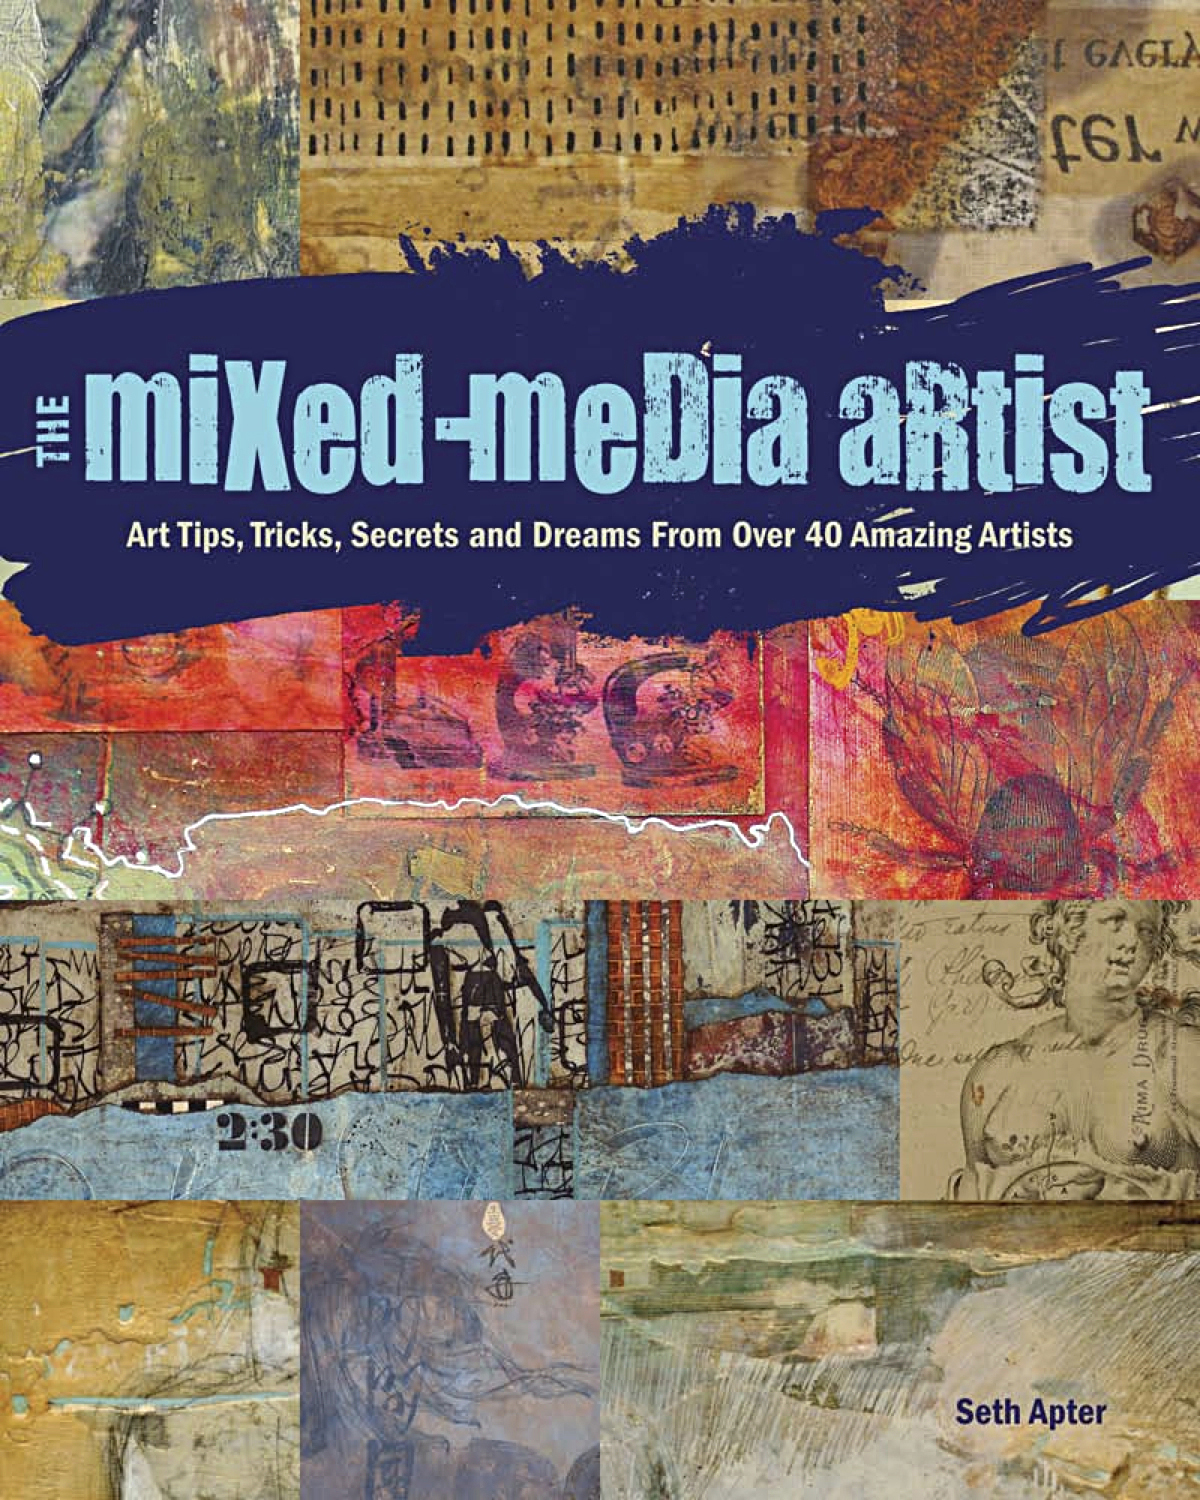 The Mixed-Media Artist: Art Tips, Tricks, Secrets and Dreams From Over 40 Amazing Artists, by Seth Apter